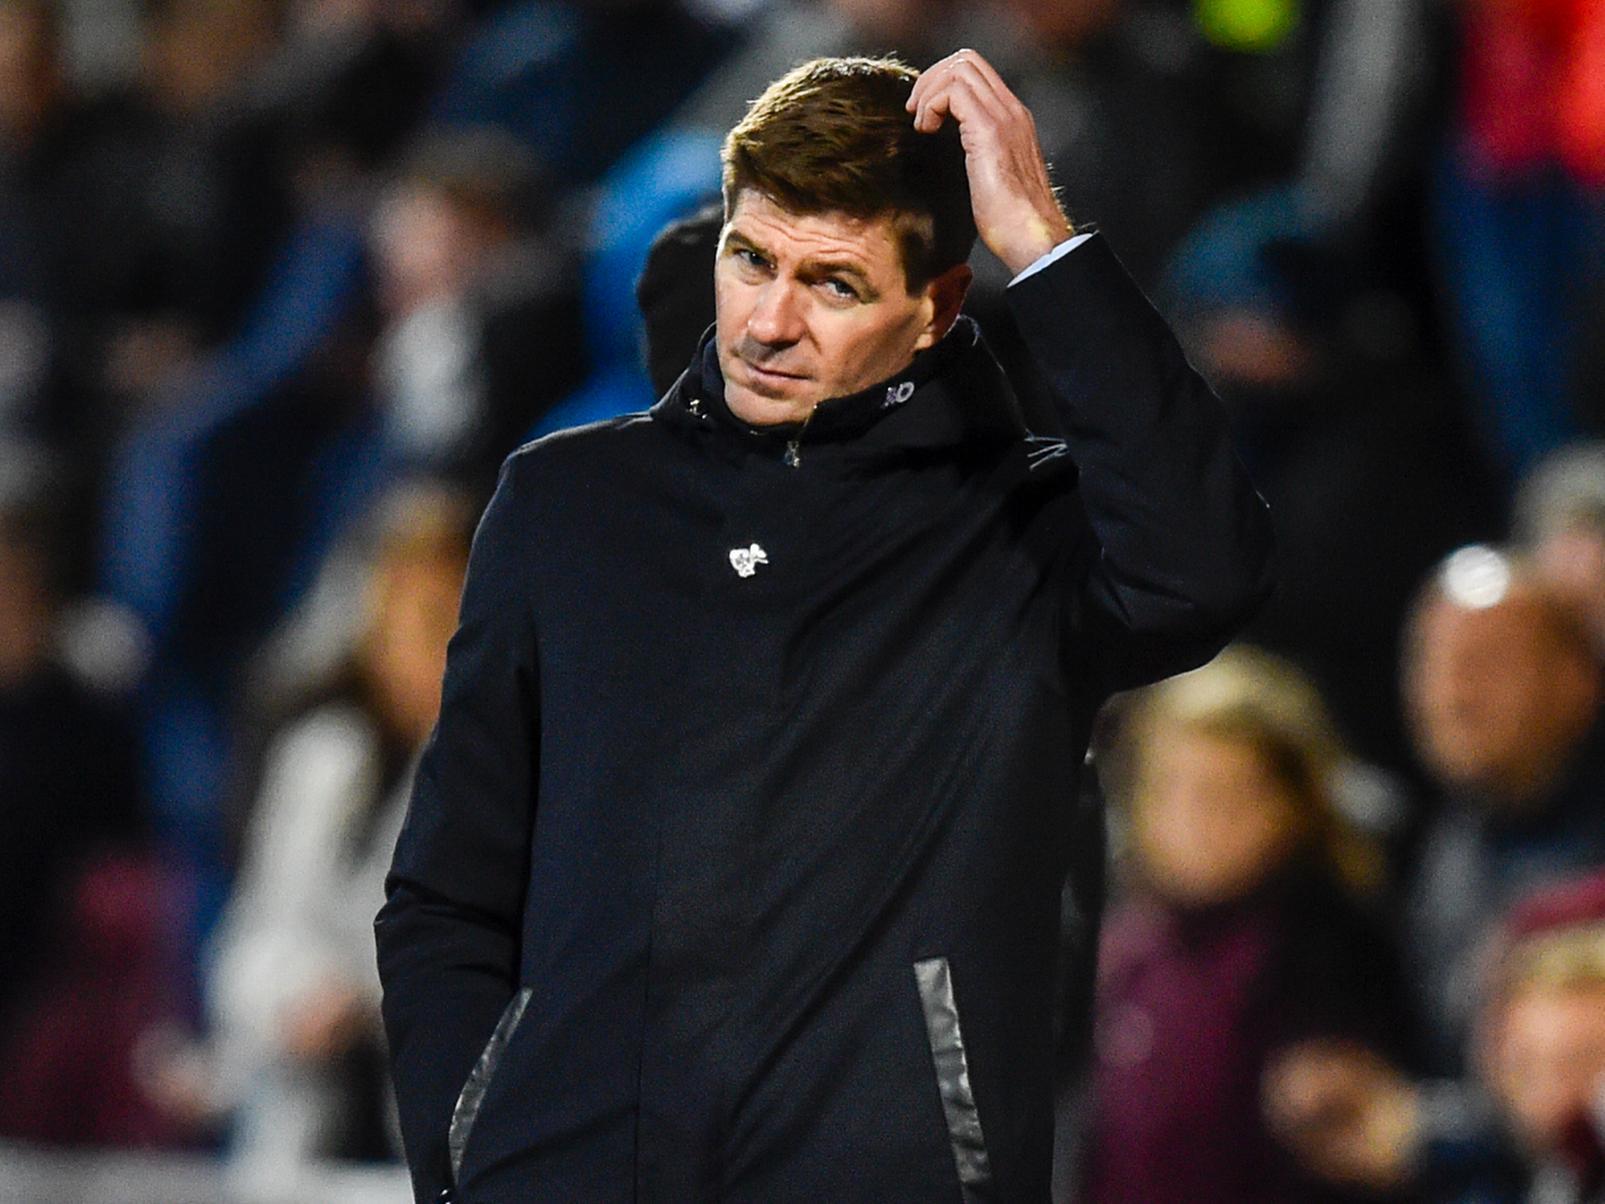 Rangers manager Steven Gerrard to consider his future over next '24 to 48  hours' | The Scotsman